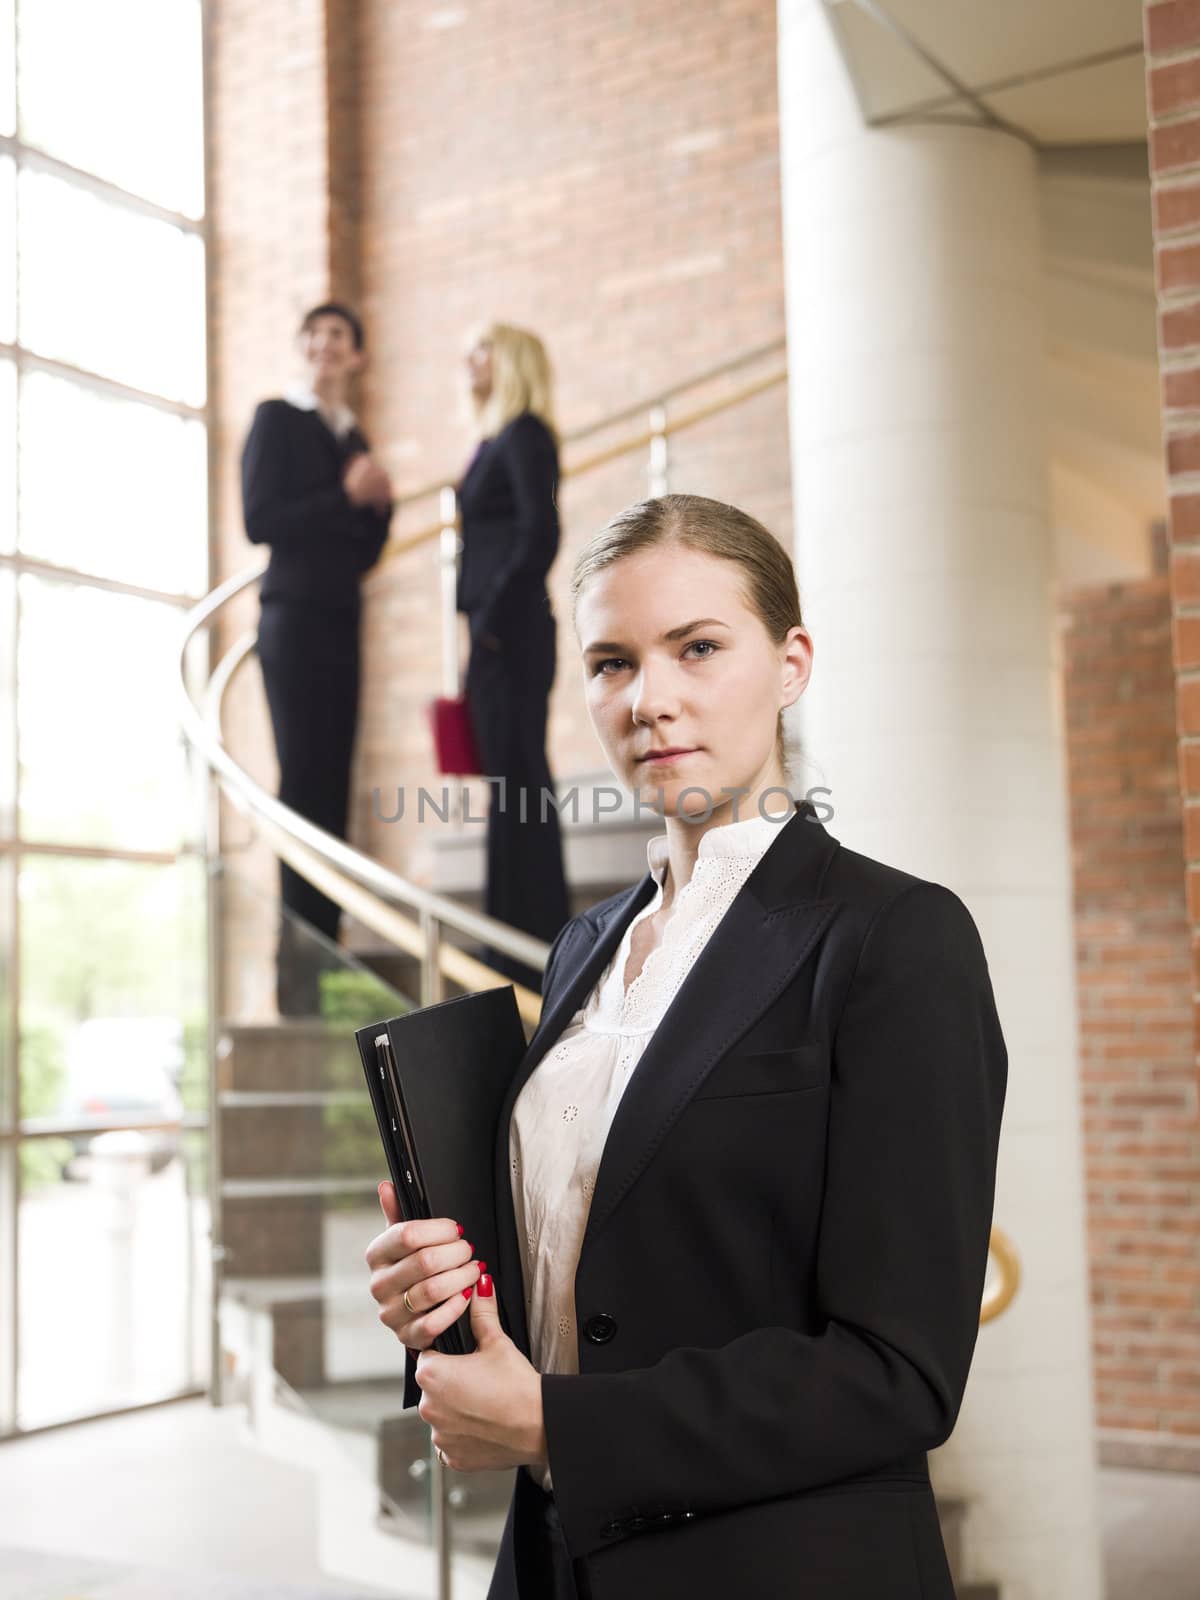 Businesswoman in front of two other women by gemenacom